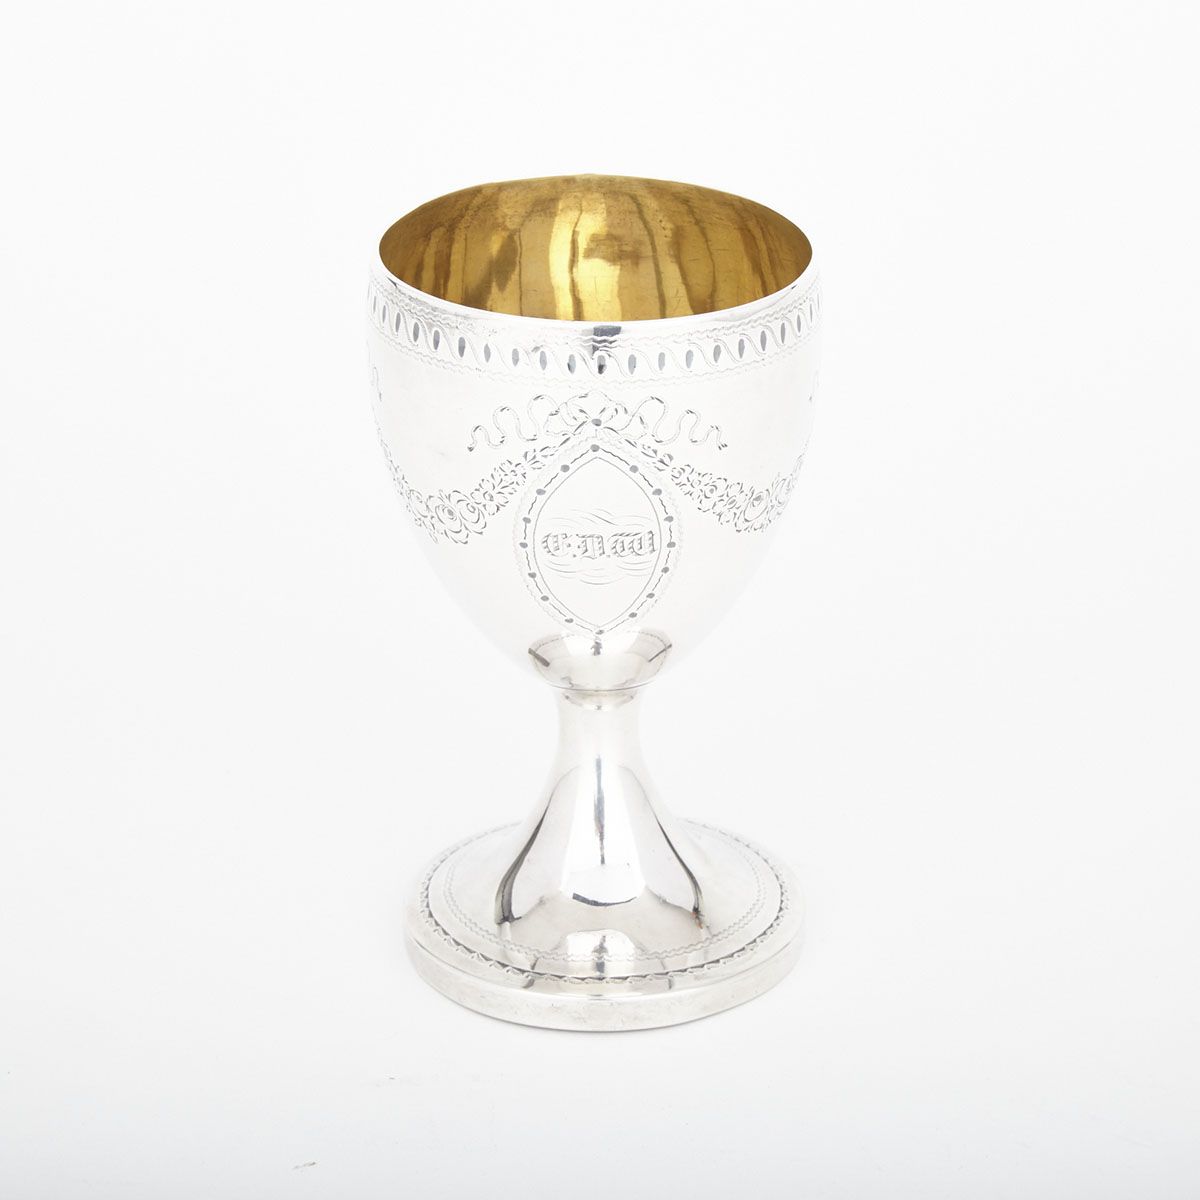 George III Engraved Silver Goblet, late 18th century